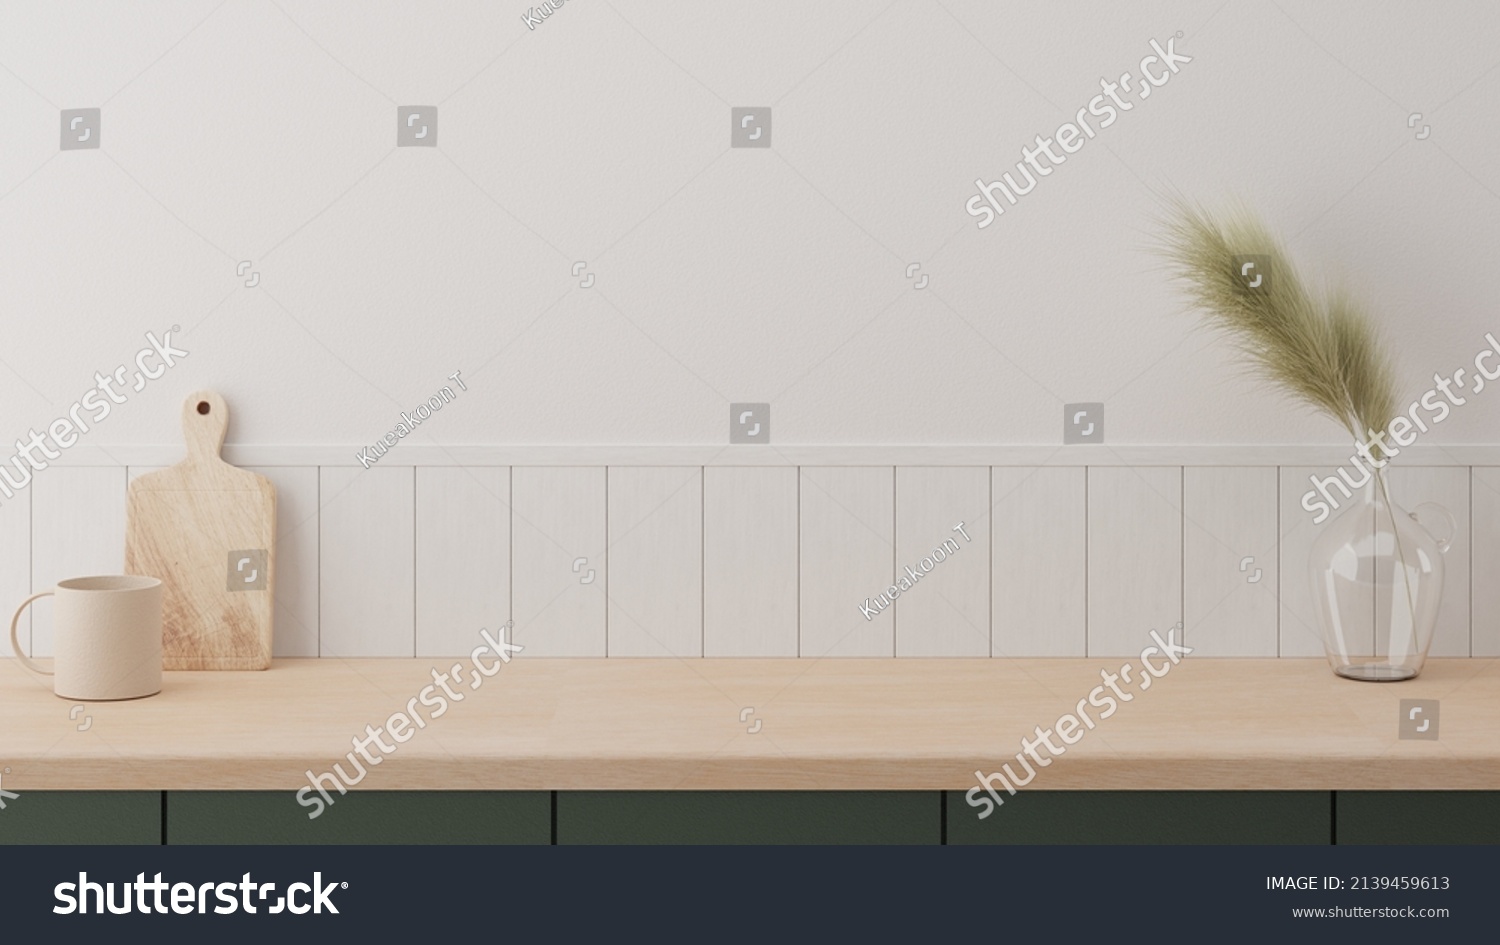 Minimal cozy counter mockup design for product presentation background. Branding in Japan style with bright wood top green counter and warm white wall grass glass vase mug. Kitchen interior  #2139459613